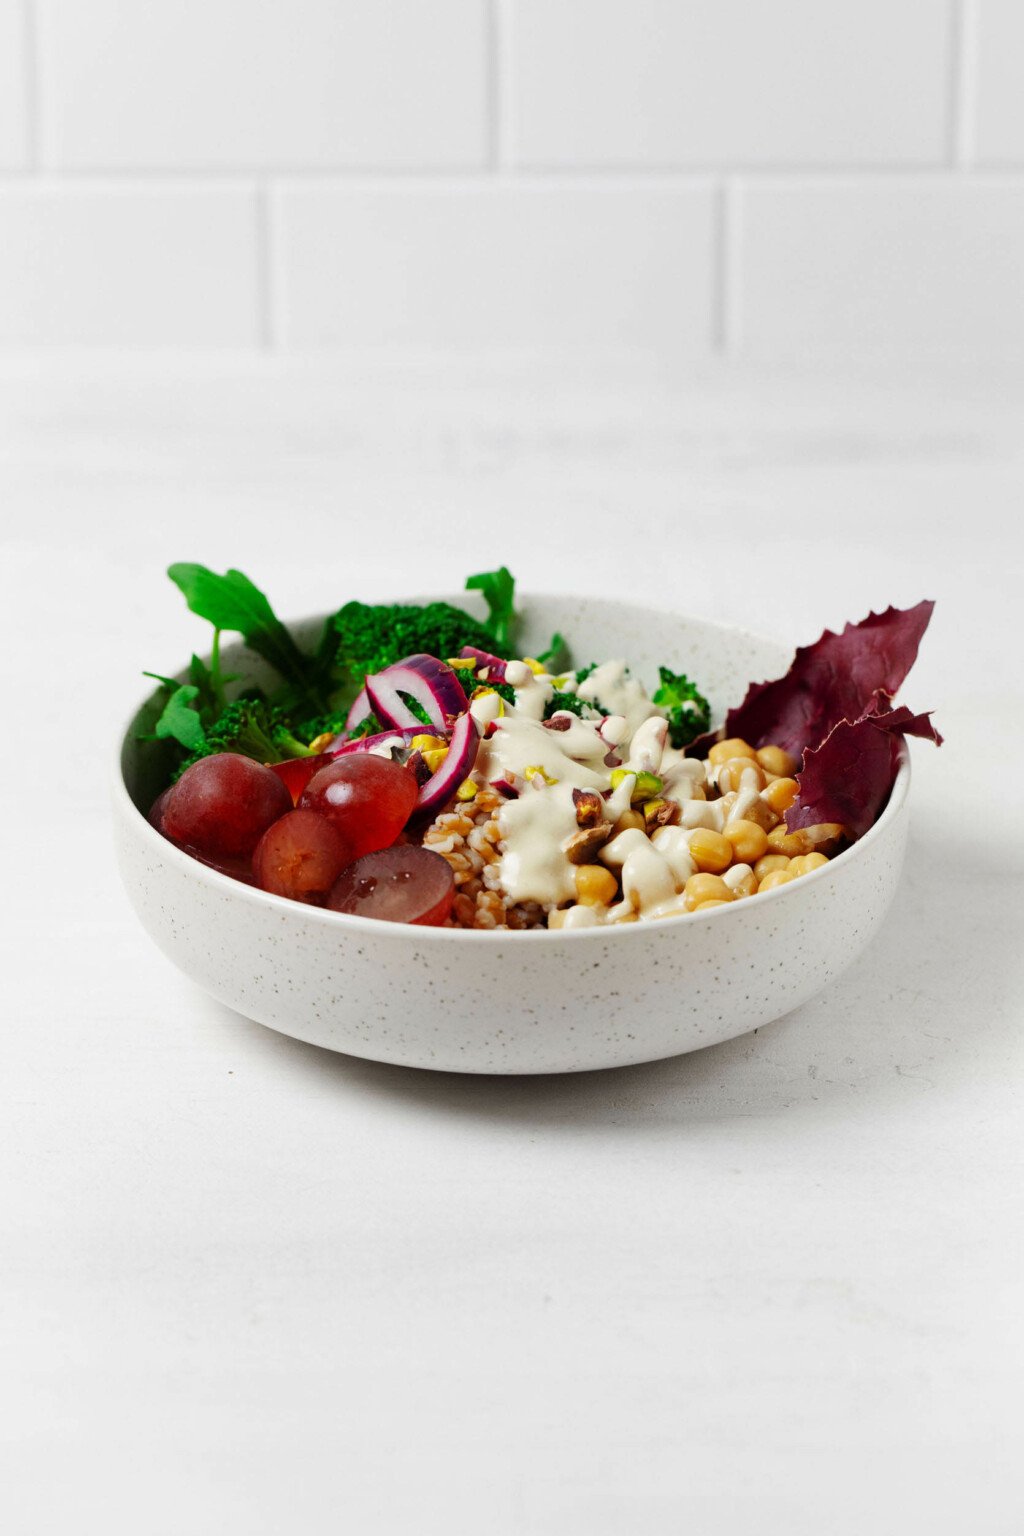 An angular image of a white bowl, filled with farro and other plant-based ingredients, resting on a white background.